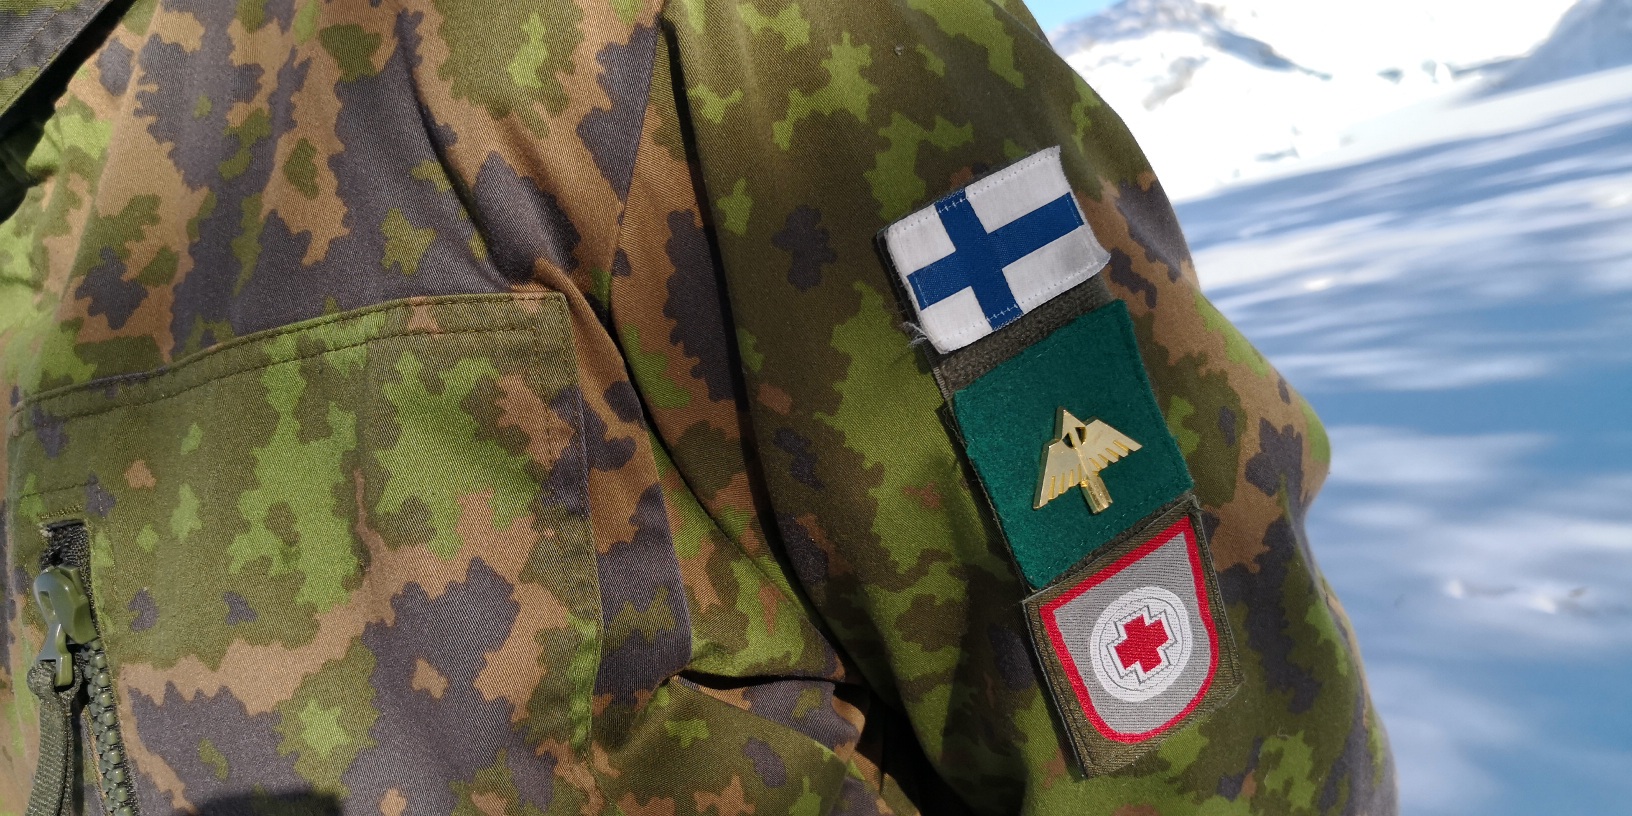 A soldier's suit sleeve with a Finnish flag, an arrow with wings and a red cross inside a white ball.